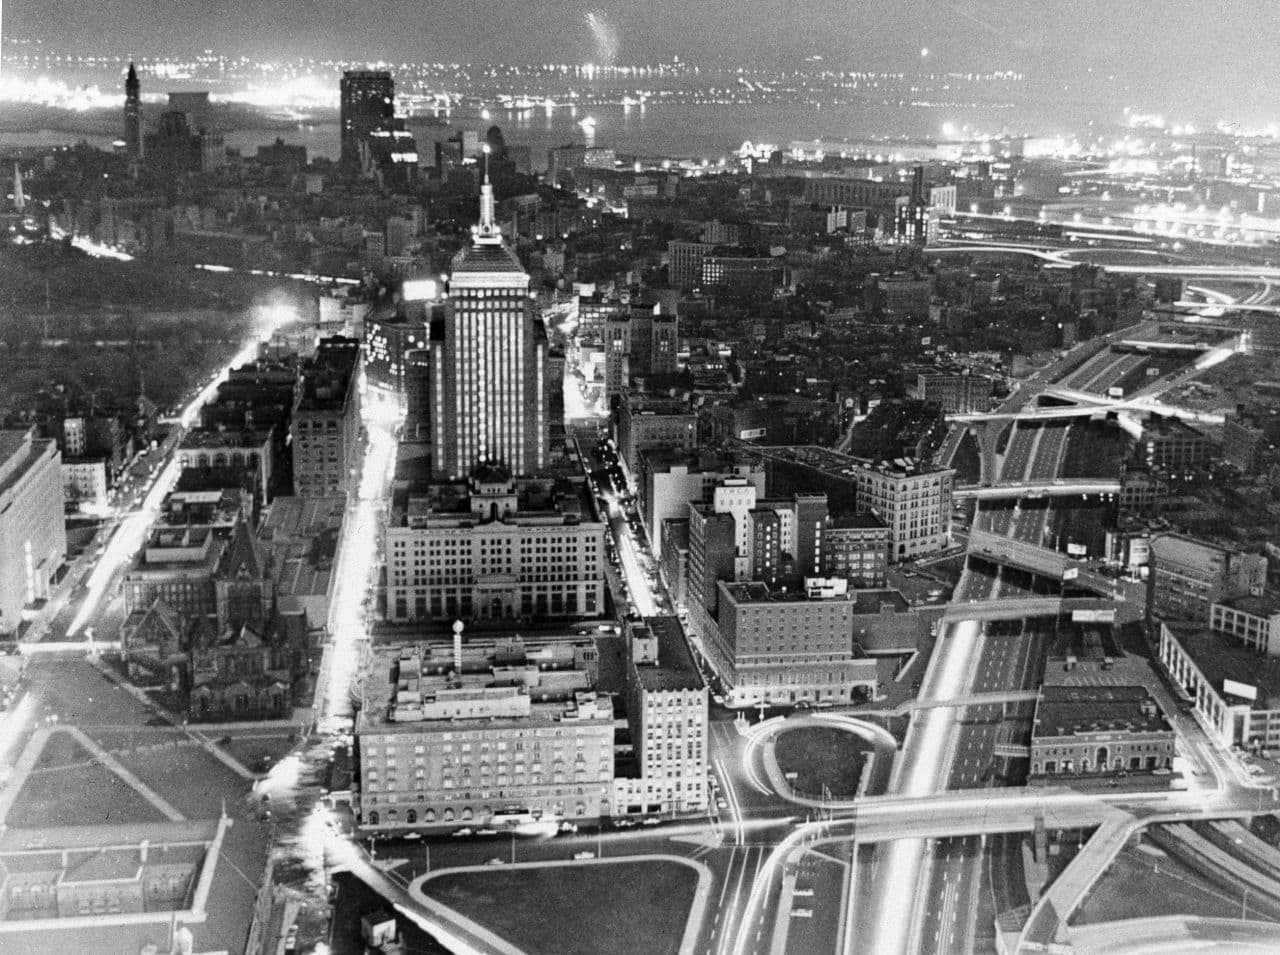 In this Nov. 9, 1965, file photo, the view from the Prudential Tower in Boston shows that not all parts of the city were plunged into darkness during the Great Northeastern Blackout. (AP File)